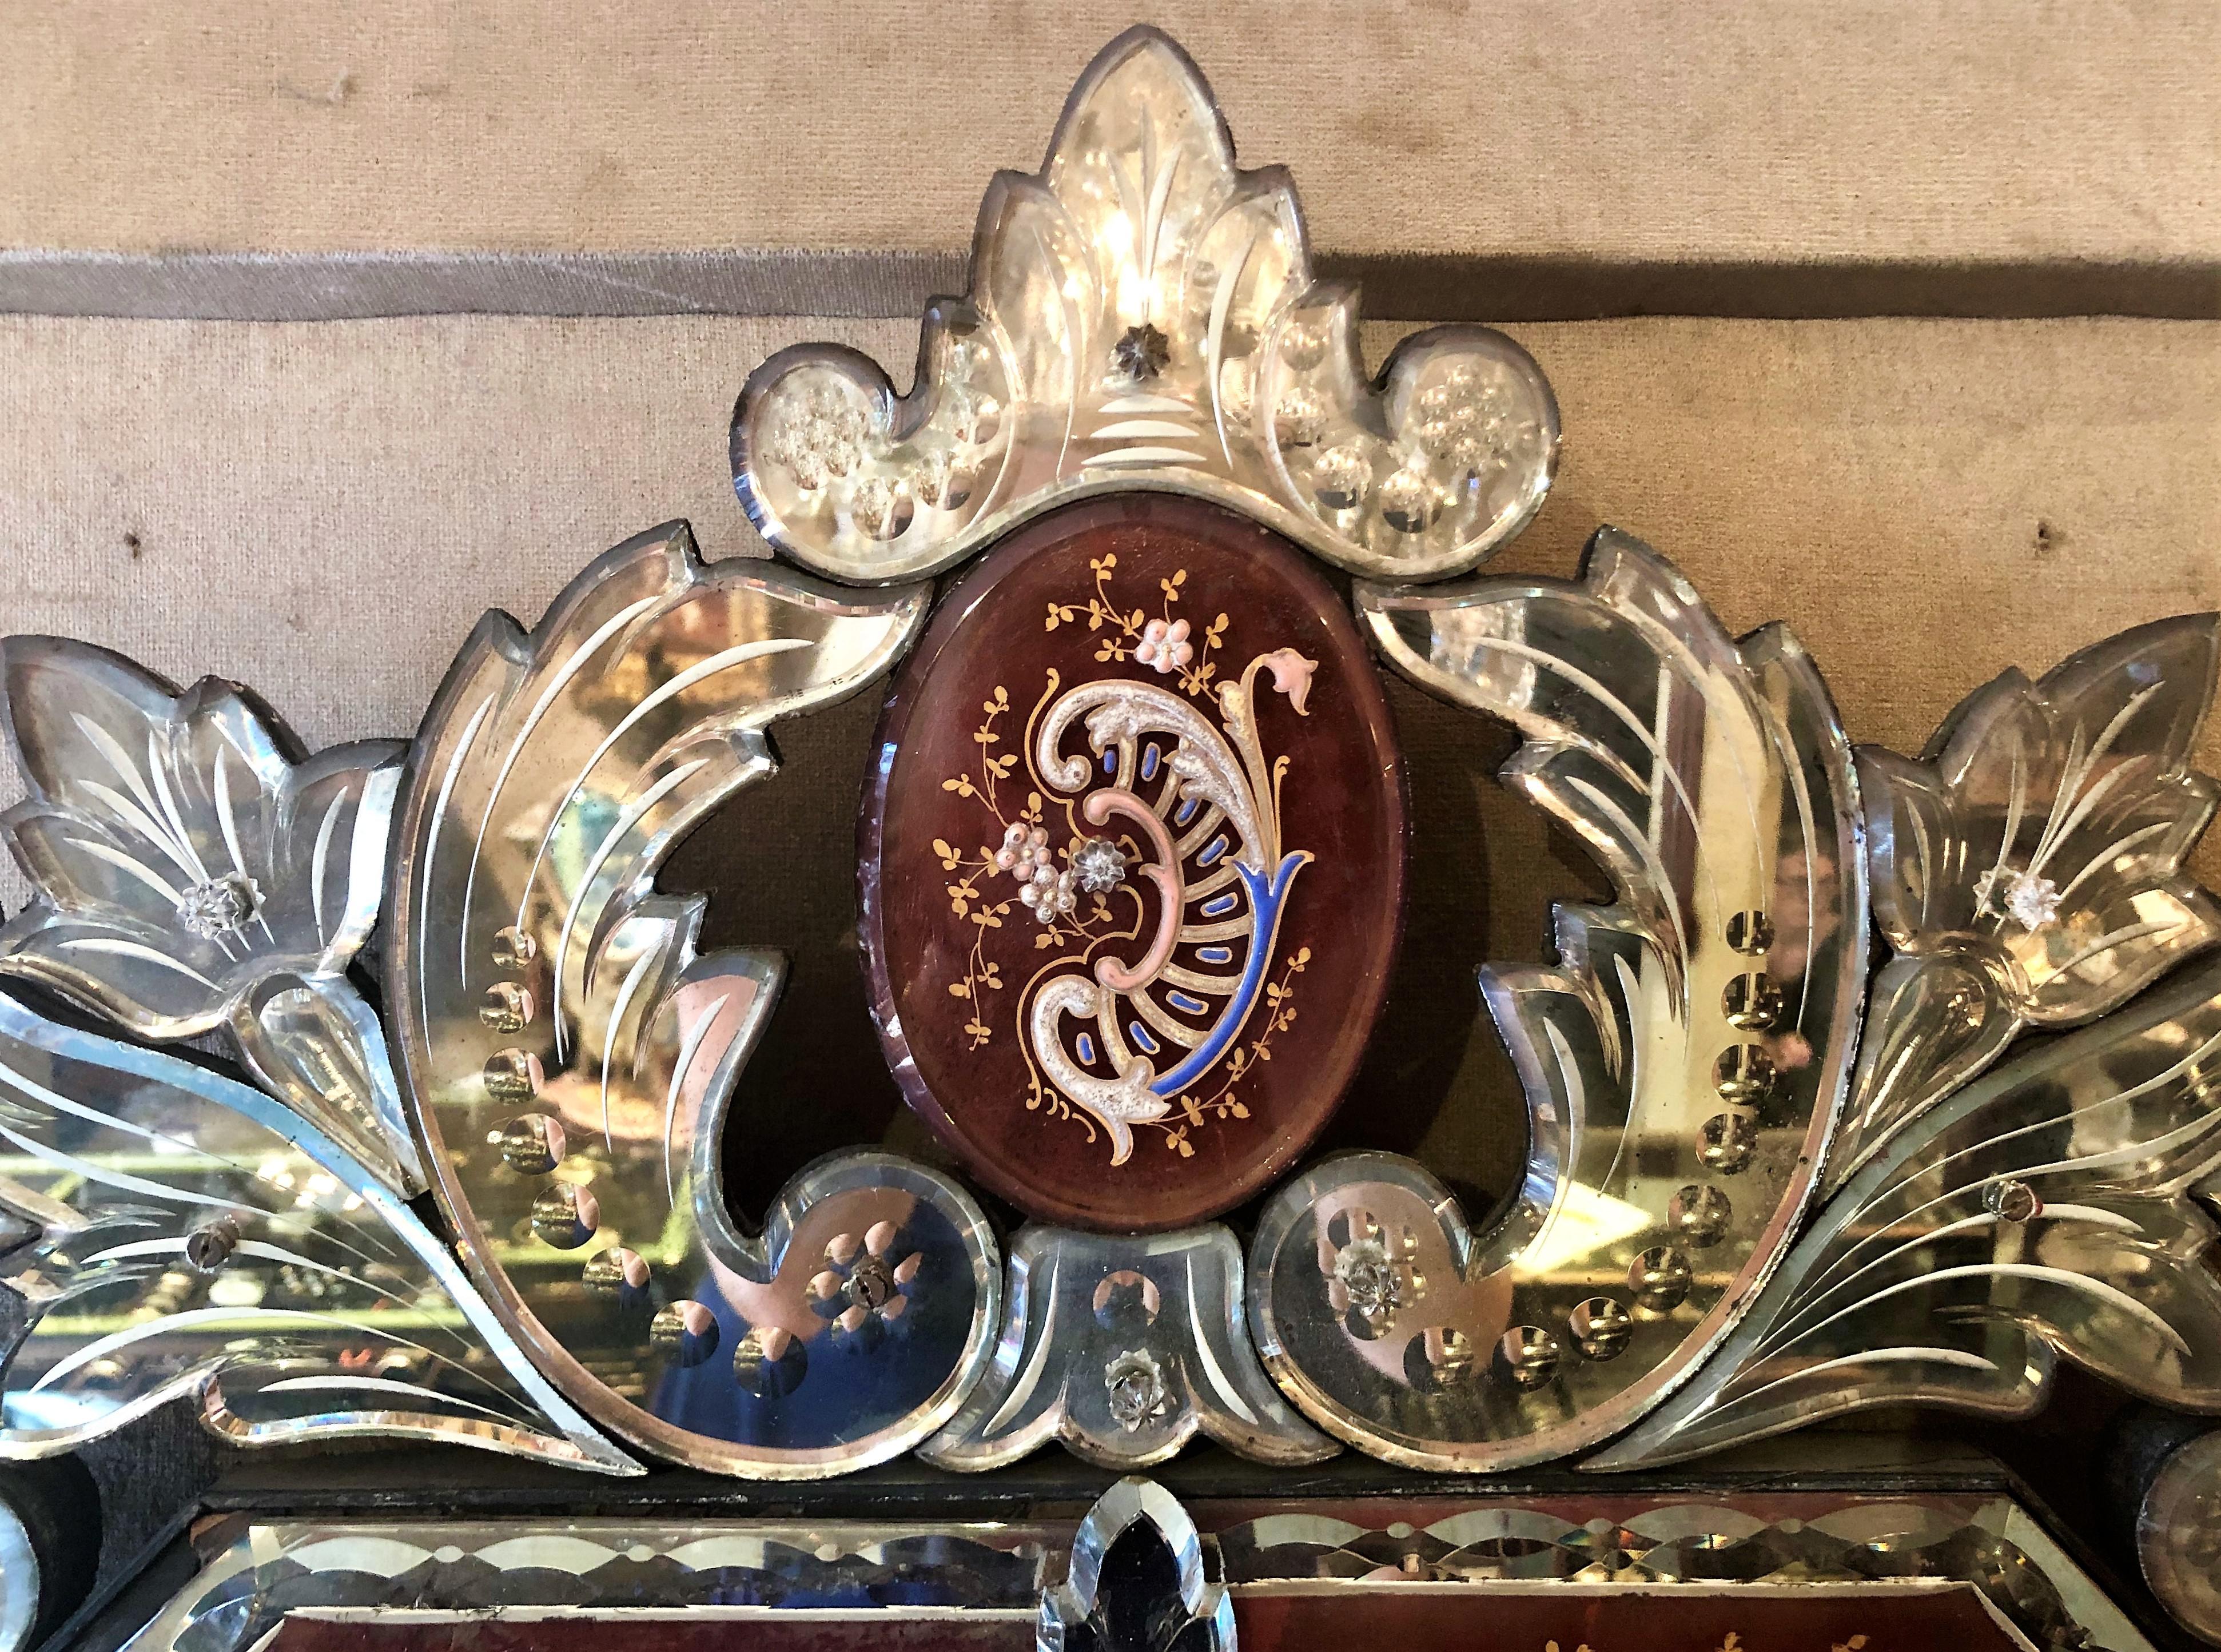 This is a wonderful mirror and would add to any home's decor irrespective of style preference. Its unique reddish brown and blue accents add to the appeal of the piece.